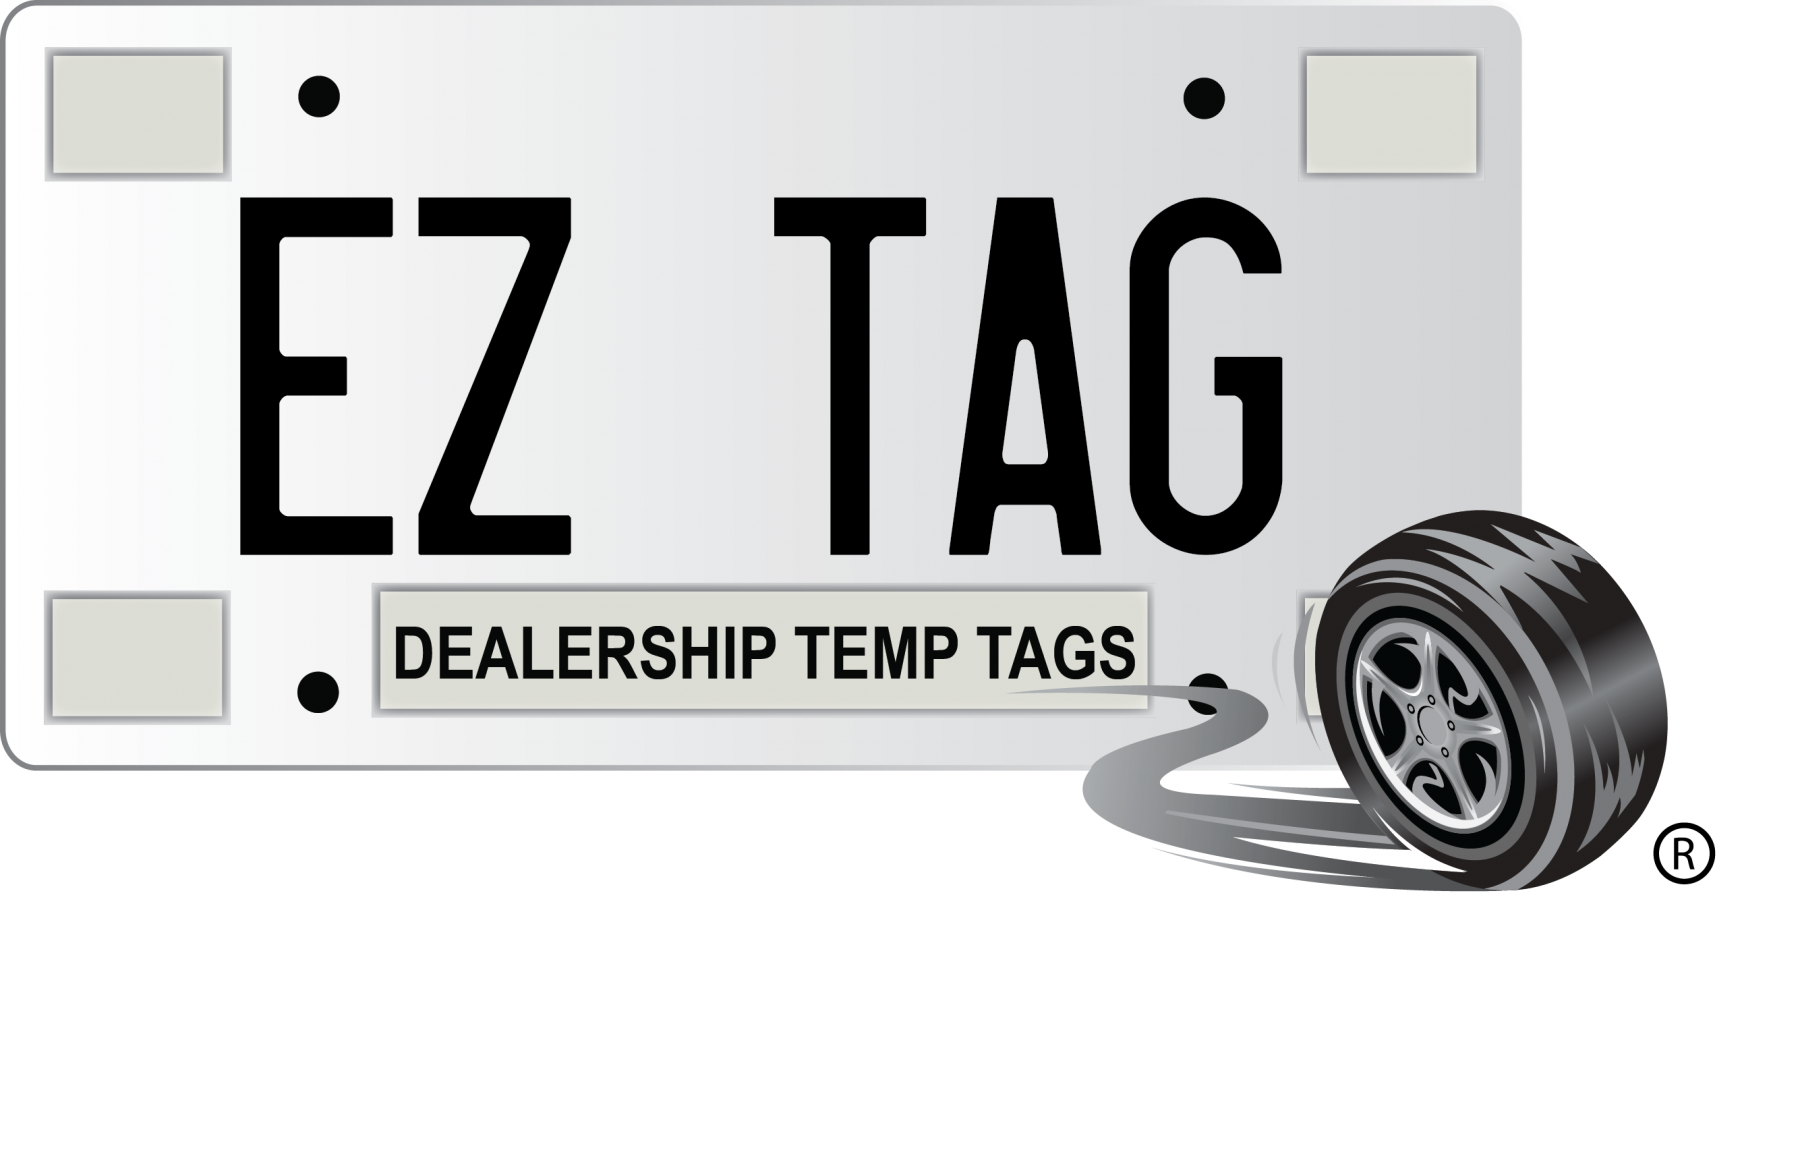 Only tags. Need Temp tags. Ez deal. Smart Dealer. Drive Dealers.